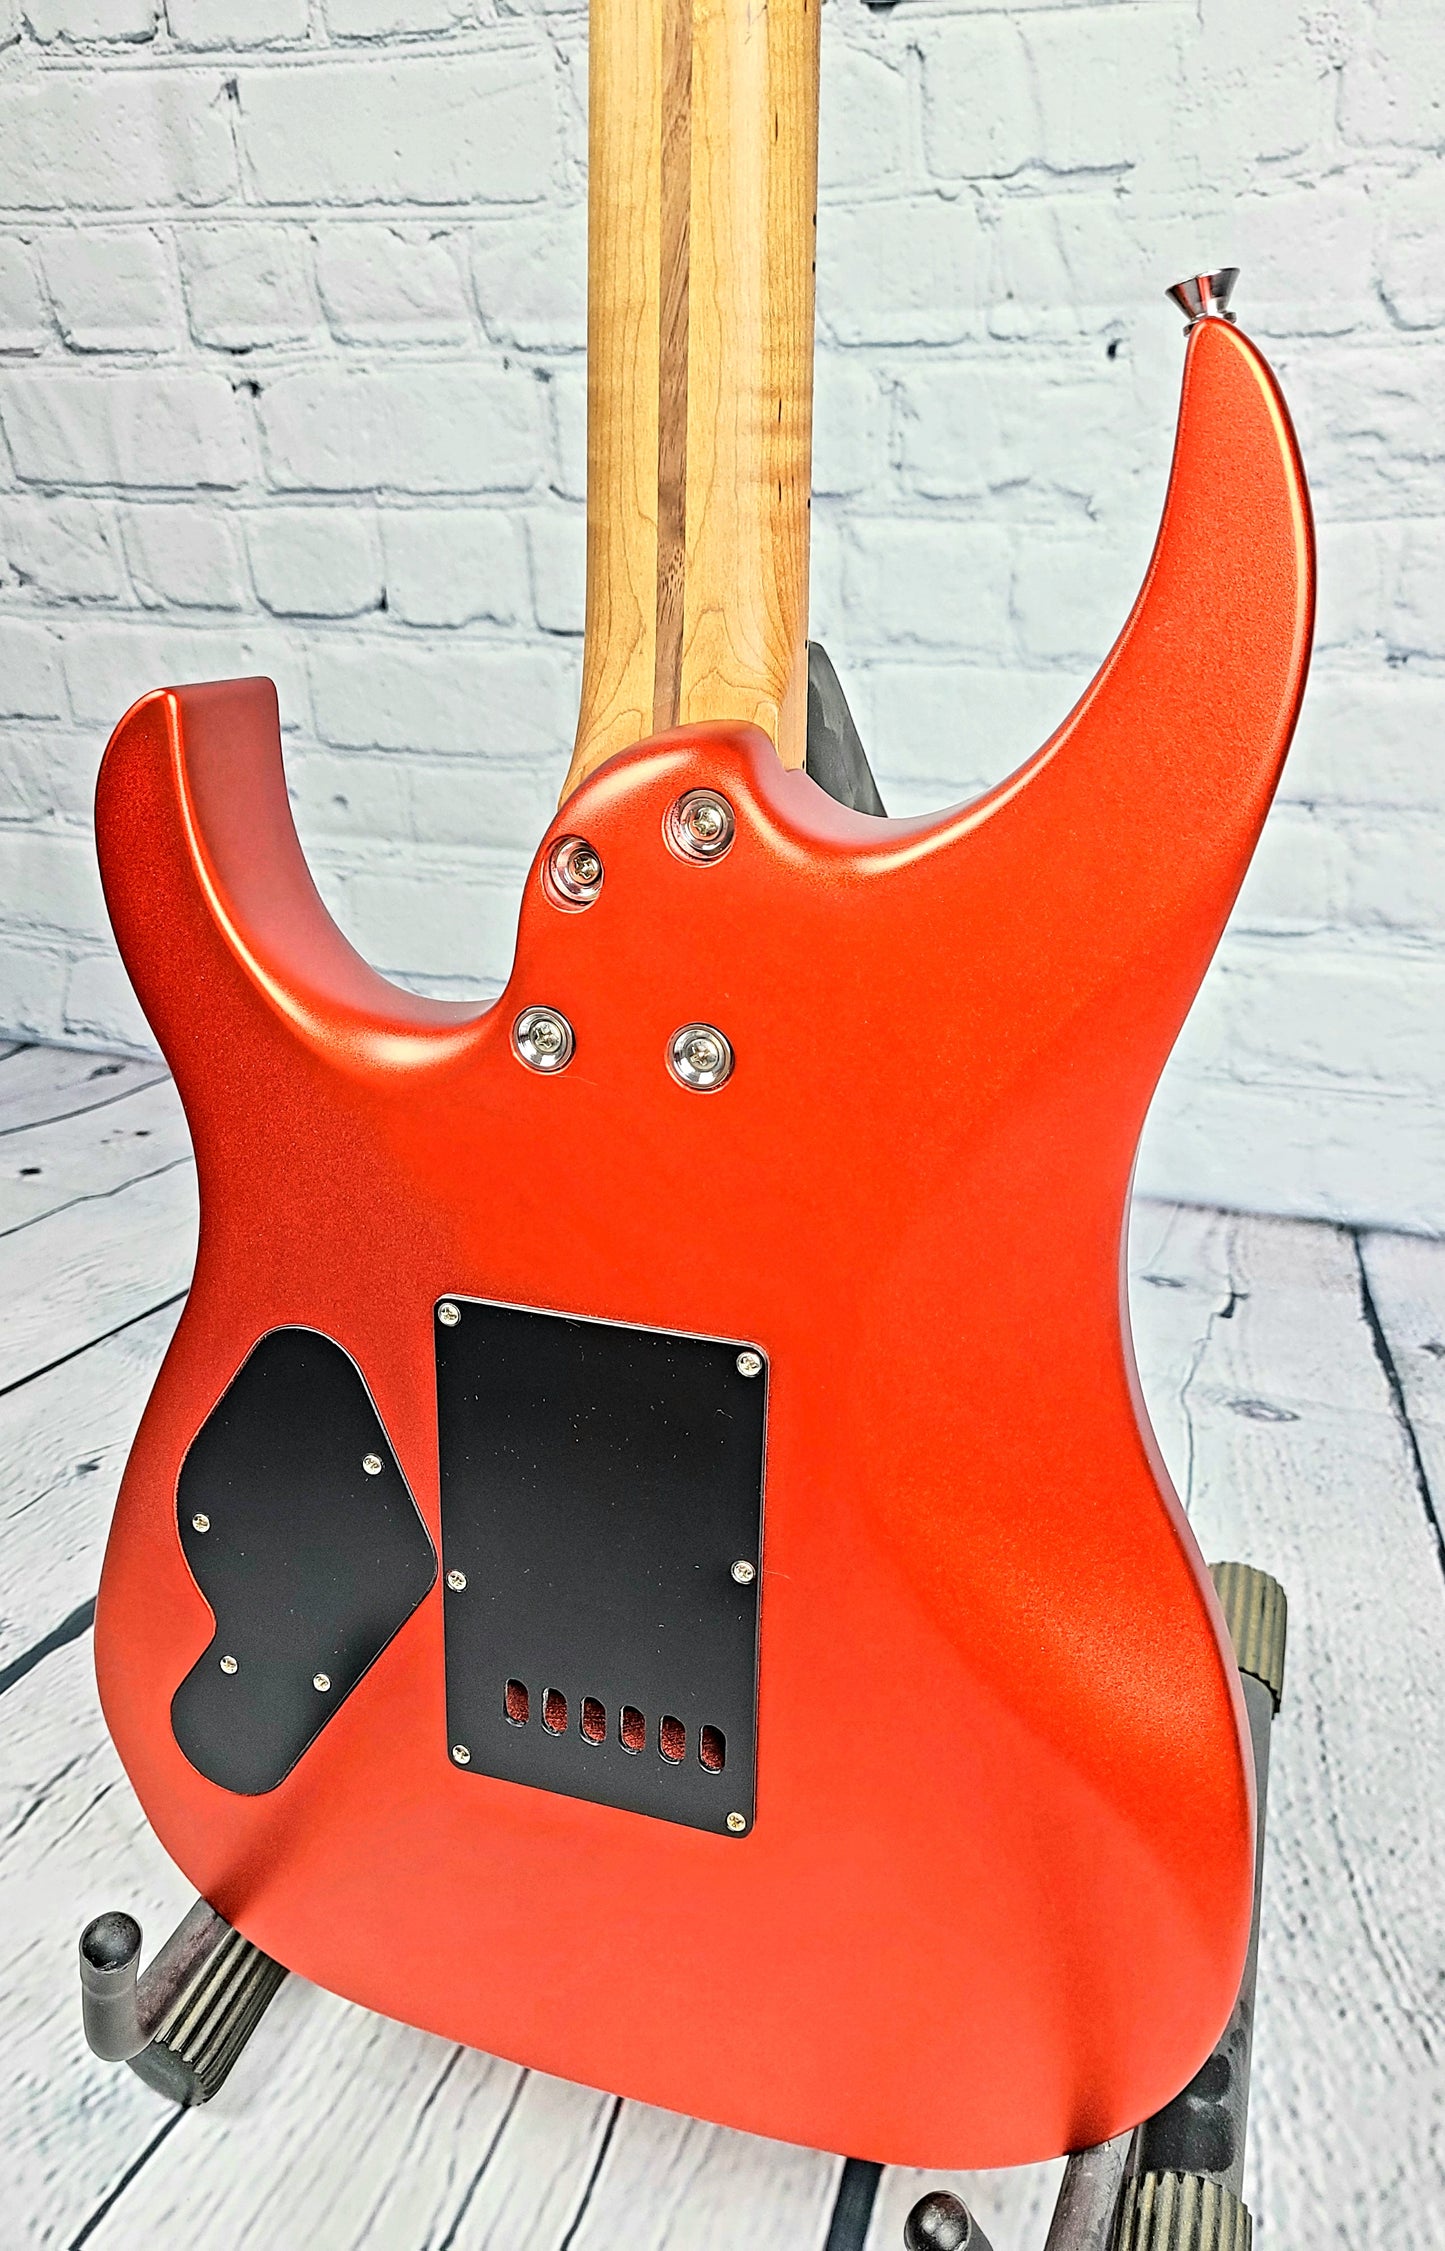 LSL Instruments XT4 One Series Roasted Maple Neck Metallic Candy Apple Red